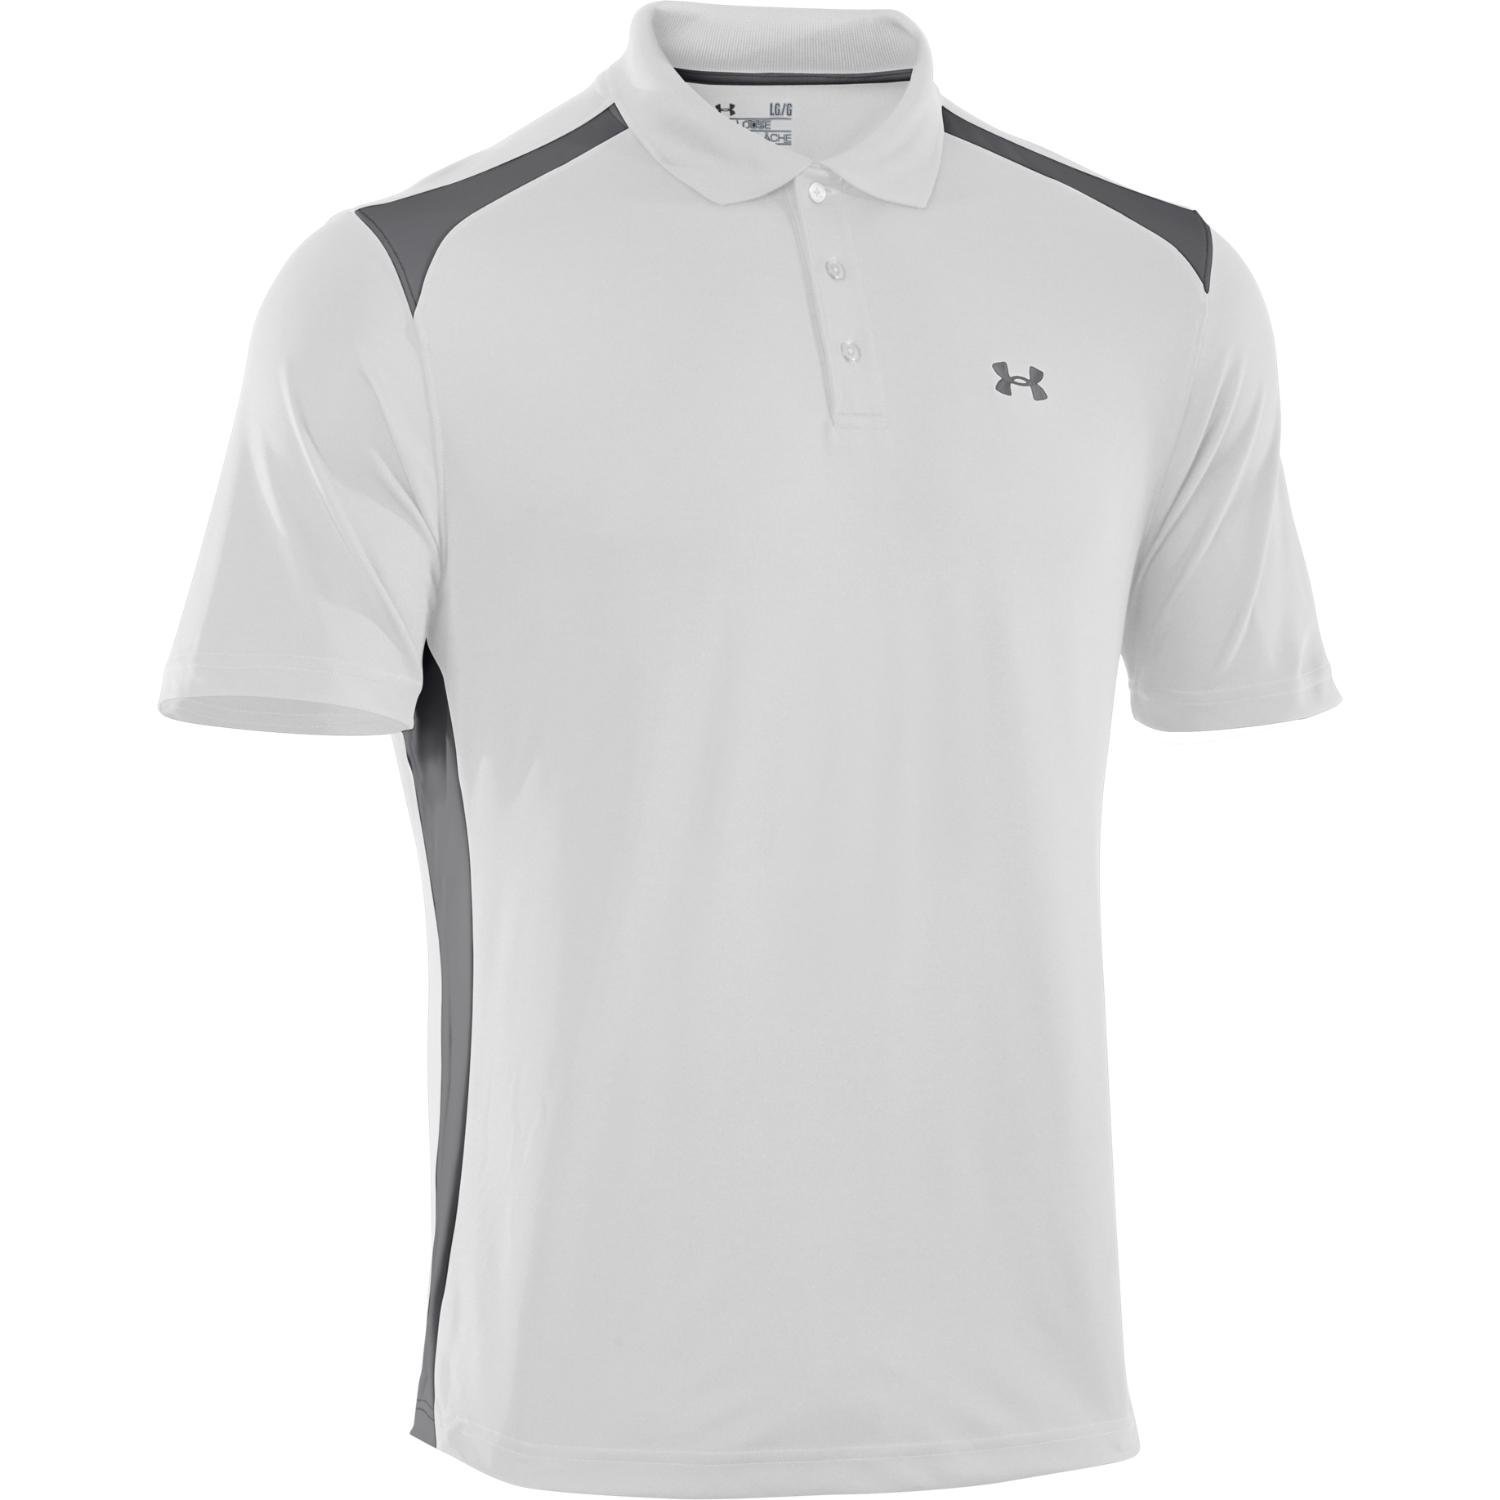 Midnight Navy/White Small Visiter la boutique Under ArmourUnder Armour Men's Team Colorblock Polo 